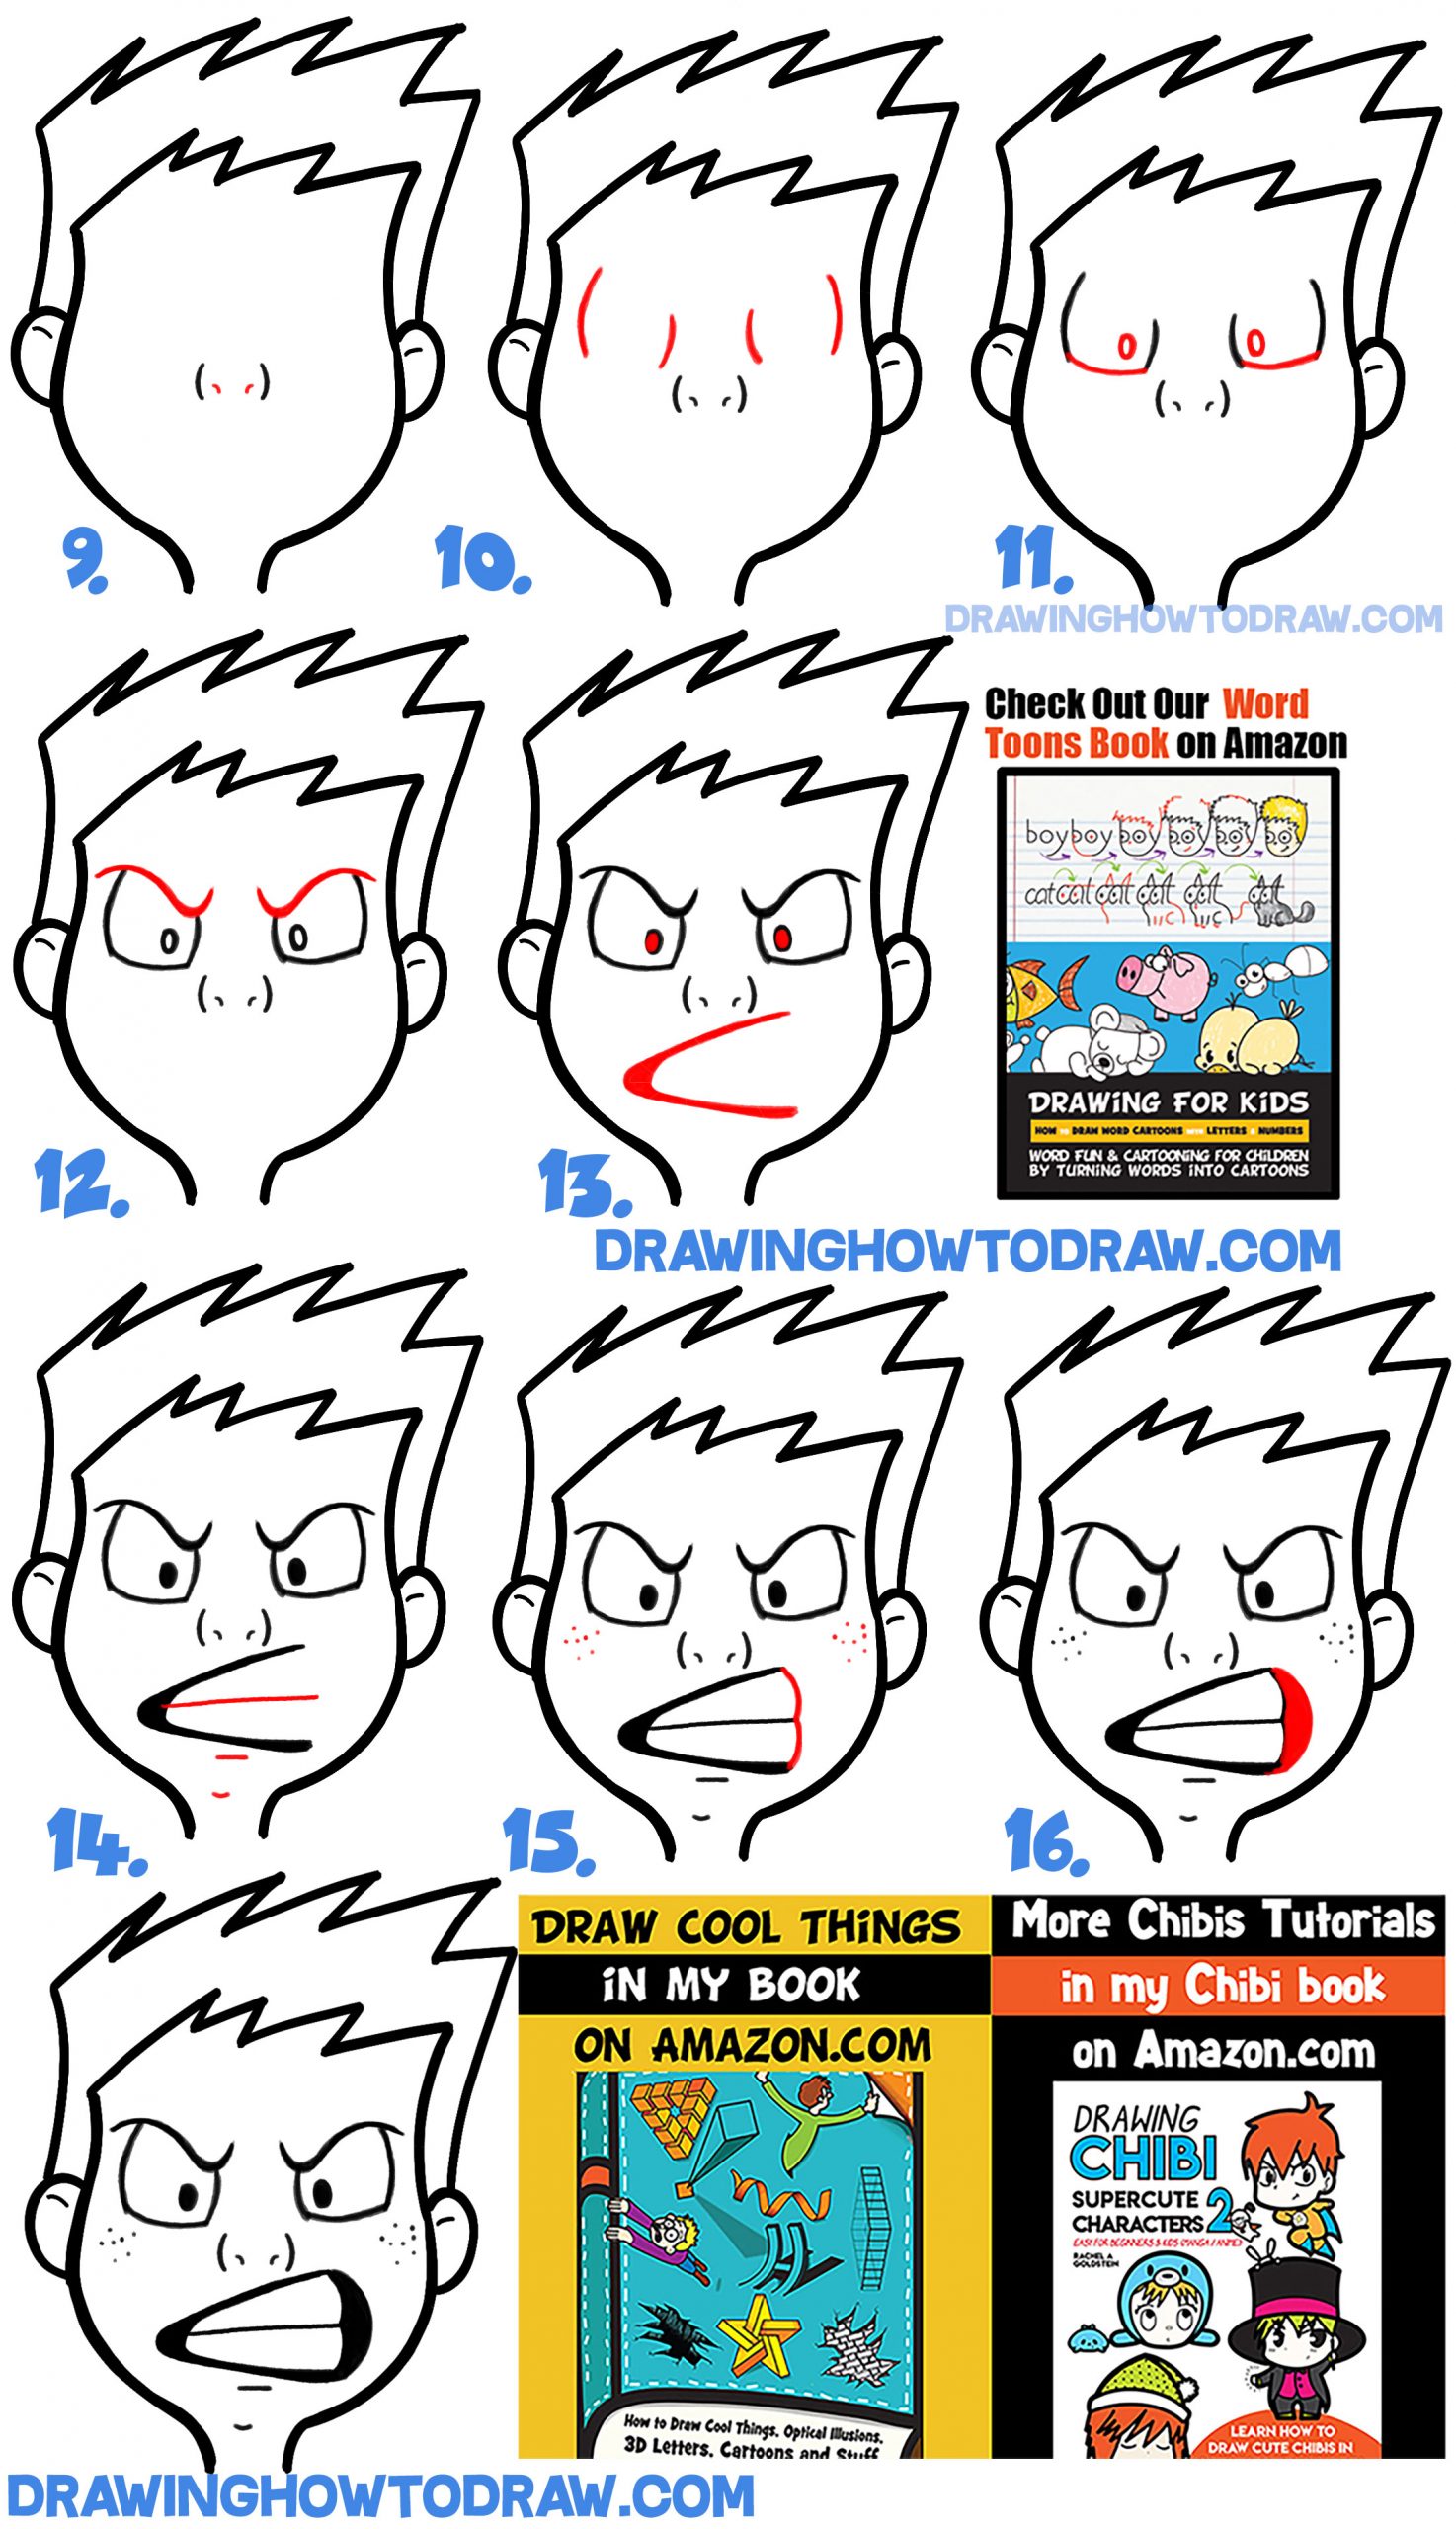 How to Draw Cartoon Facial Expressions Angry, Furious, Mad How to